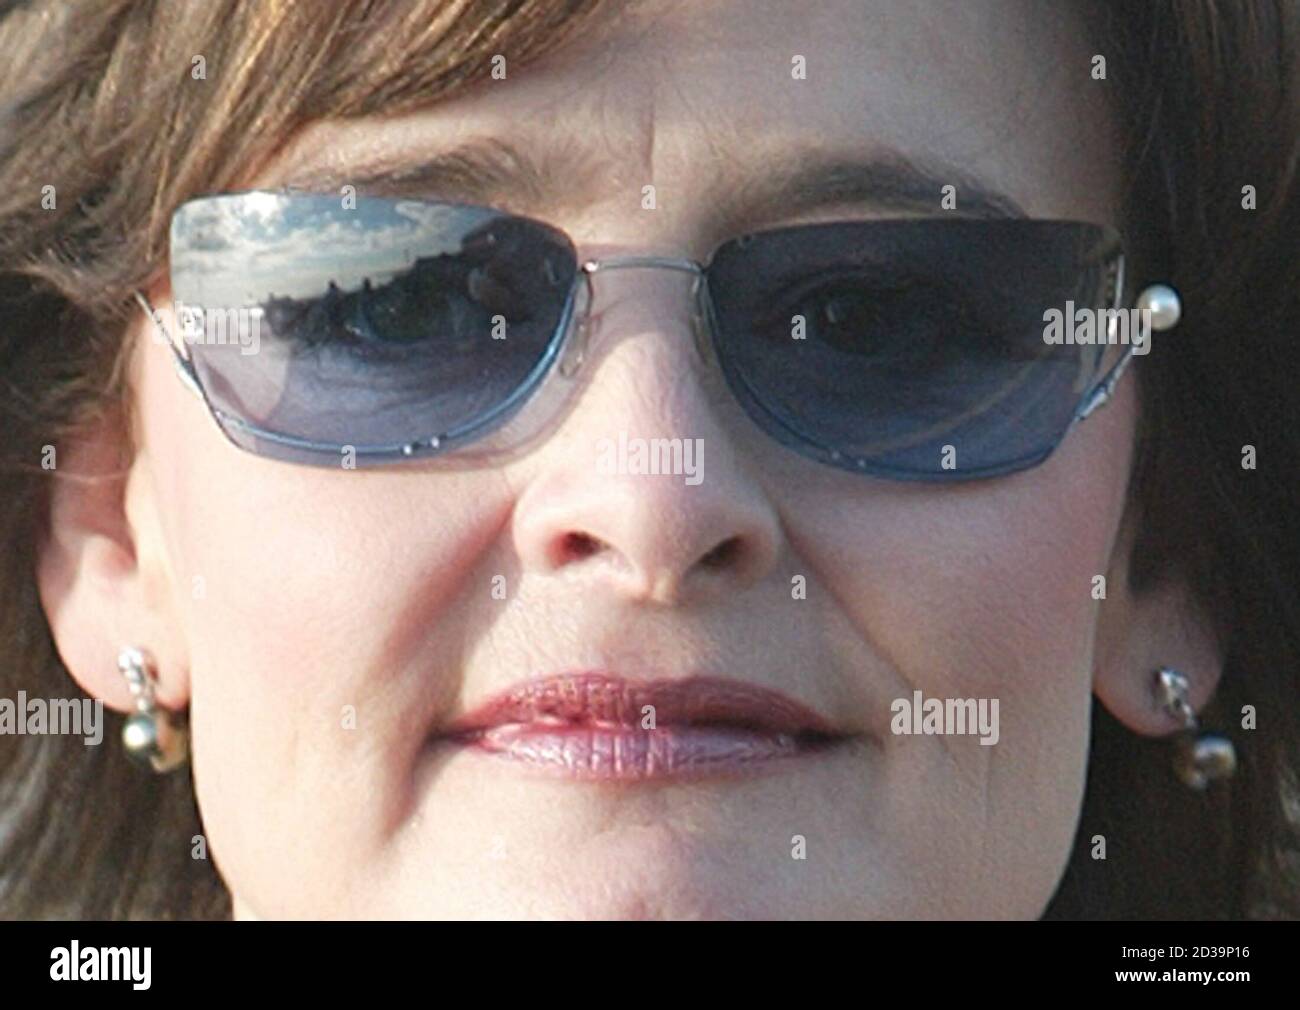 Cherie Blair, wife of Britain's Prime Minister, wears sunglasses as she walks in the early morning sunshine on the second day of the Labour Party conference in Bournemouth September 29, 2003. REUTERS/Stephen Hird  RUS/CRB Stock Photo